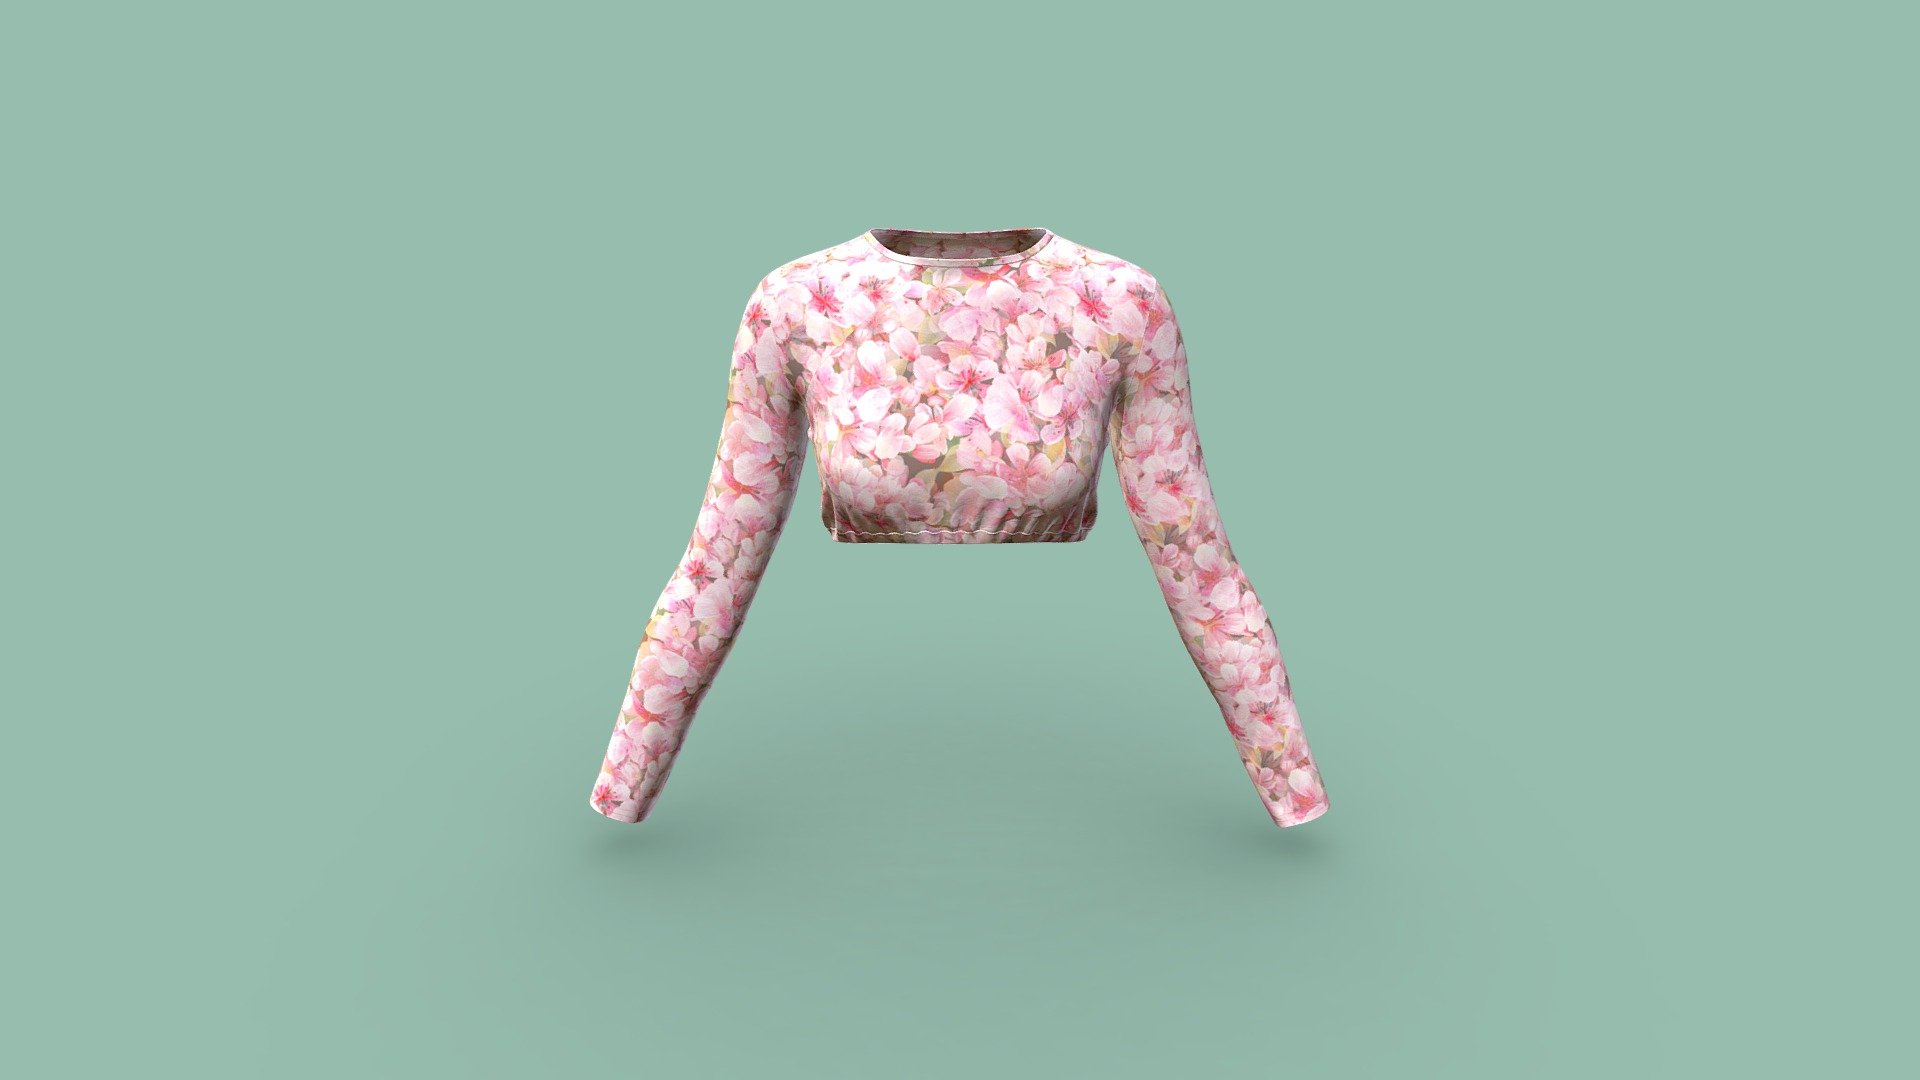 Cloth Title = Slim Fit Long Sleeve Crop Top 

SKU = DG100068 

Category = Women 

Product Type = Top 

Cloth Length = Cropped 

Body Fit = Slim Fit 

Occasion = Casual  

Sleeve Style = Set In Sleeve 


Our Services: 

3D Apparel Design. 

OBJ,FBX,GLTF Making with High/Low Poly. 

Fabric Digitalization. 

Mockup making. 

3D Teck Pack. 

Pattern Making. 

2D Illustration. 

Cloth Animation and 360 Spin Video. 


Contact us:- 

Email: info@digitalfashionwear.com 

Website: https://digitalfashionwear.com 

WhatsApp No: +8801759350445 


We designed all the types of cloth specially focused on product visualization, e-commerce, fitting, and production. 

We will design: 

T-shirts 

Polo shirts 

Hoodies 

Sweatshirt 

Jackets 

Shirts 

TankTops 

Trousers 

Bras 

Underwear 

Blazer 

Aprons 

Leggings 

and All Fashion items





Our goal is to make sure what we provide you, meets your demand 3d model